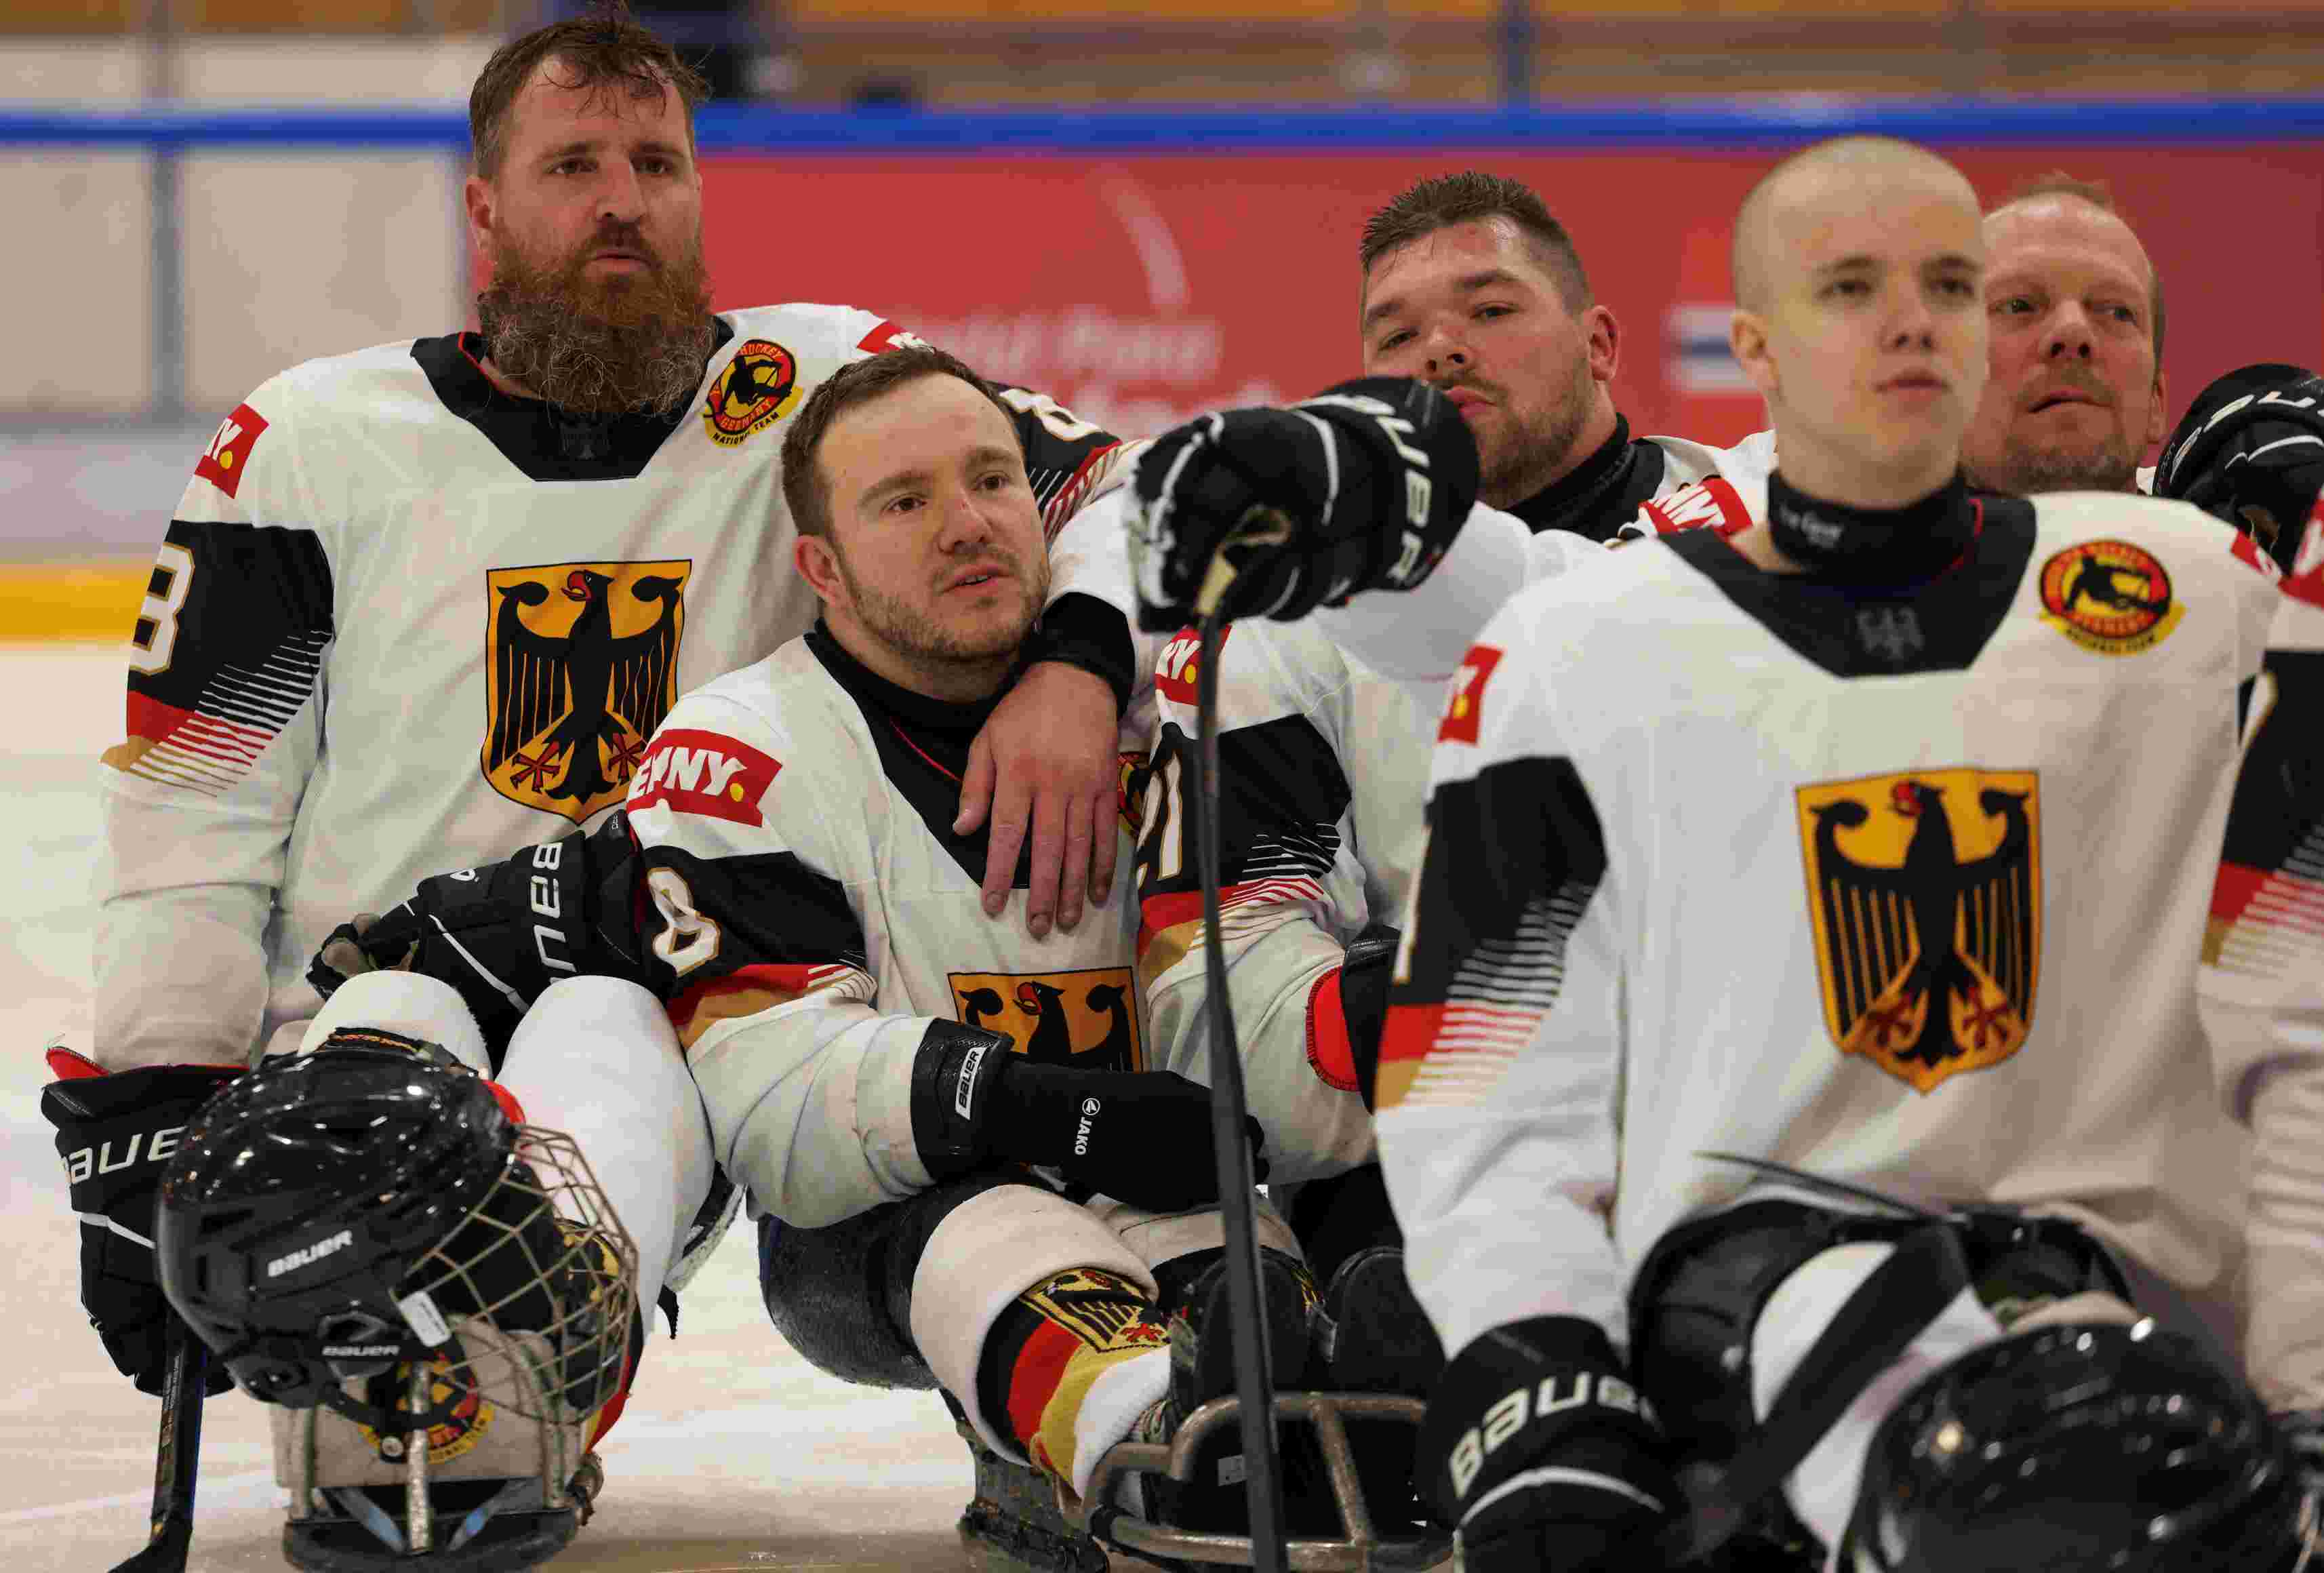 Players during a Para ice hockey match